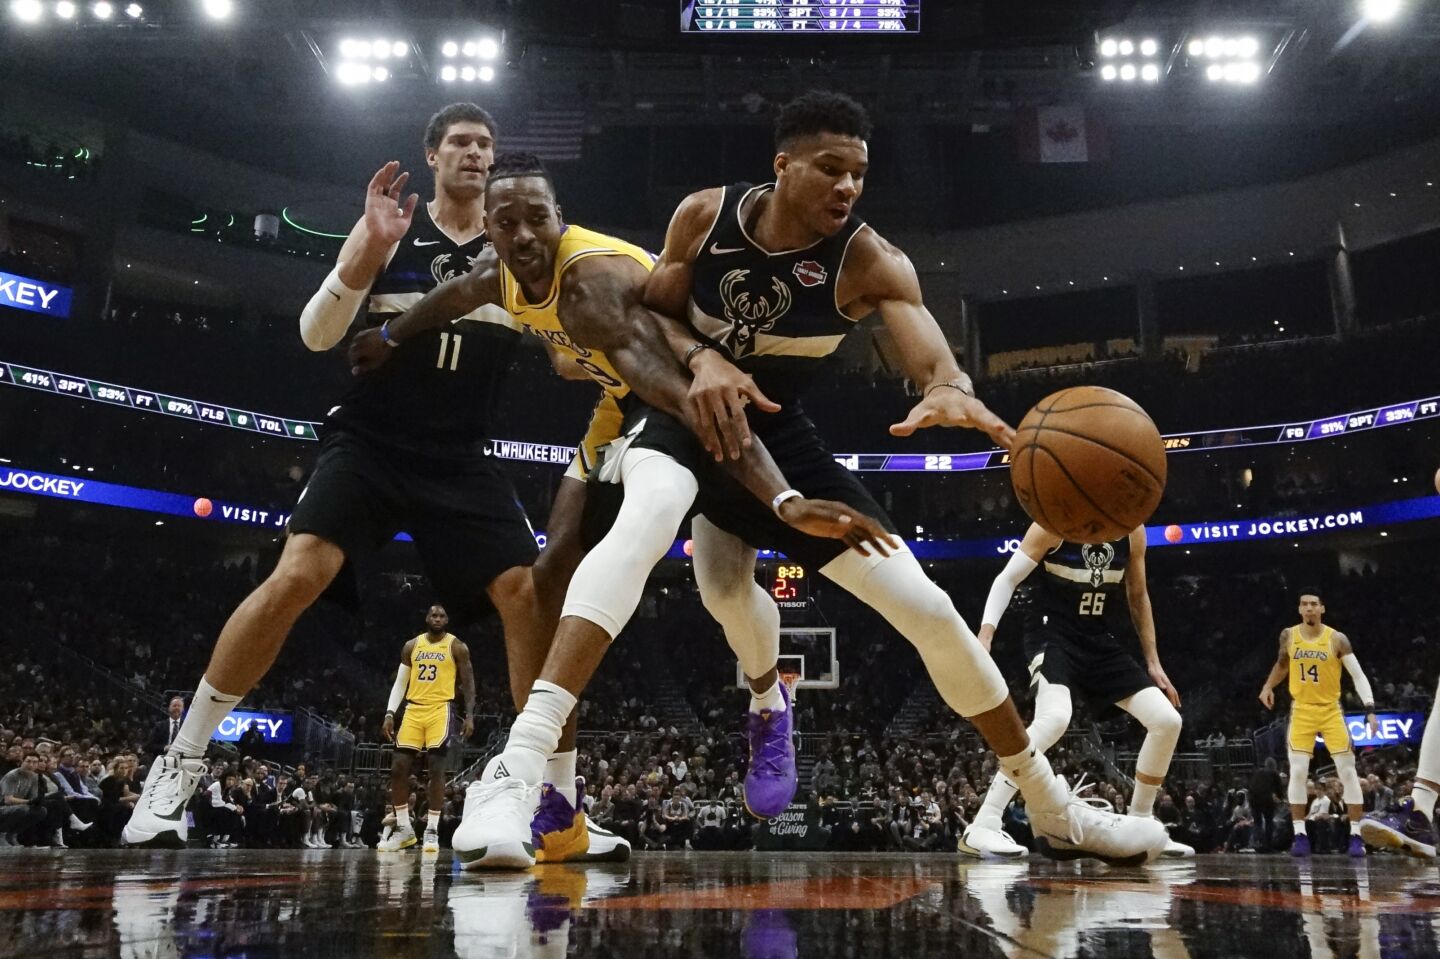 Bucks forward Giannis Antetokounmpo and Lakers center Dwight Howard battle for a loose ball during the first half of a game Dec. 19.